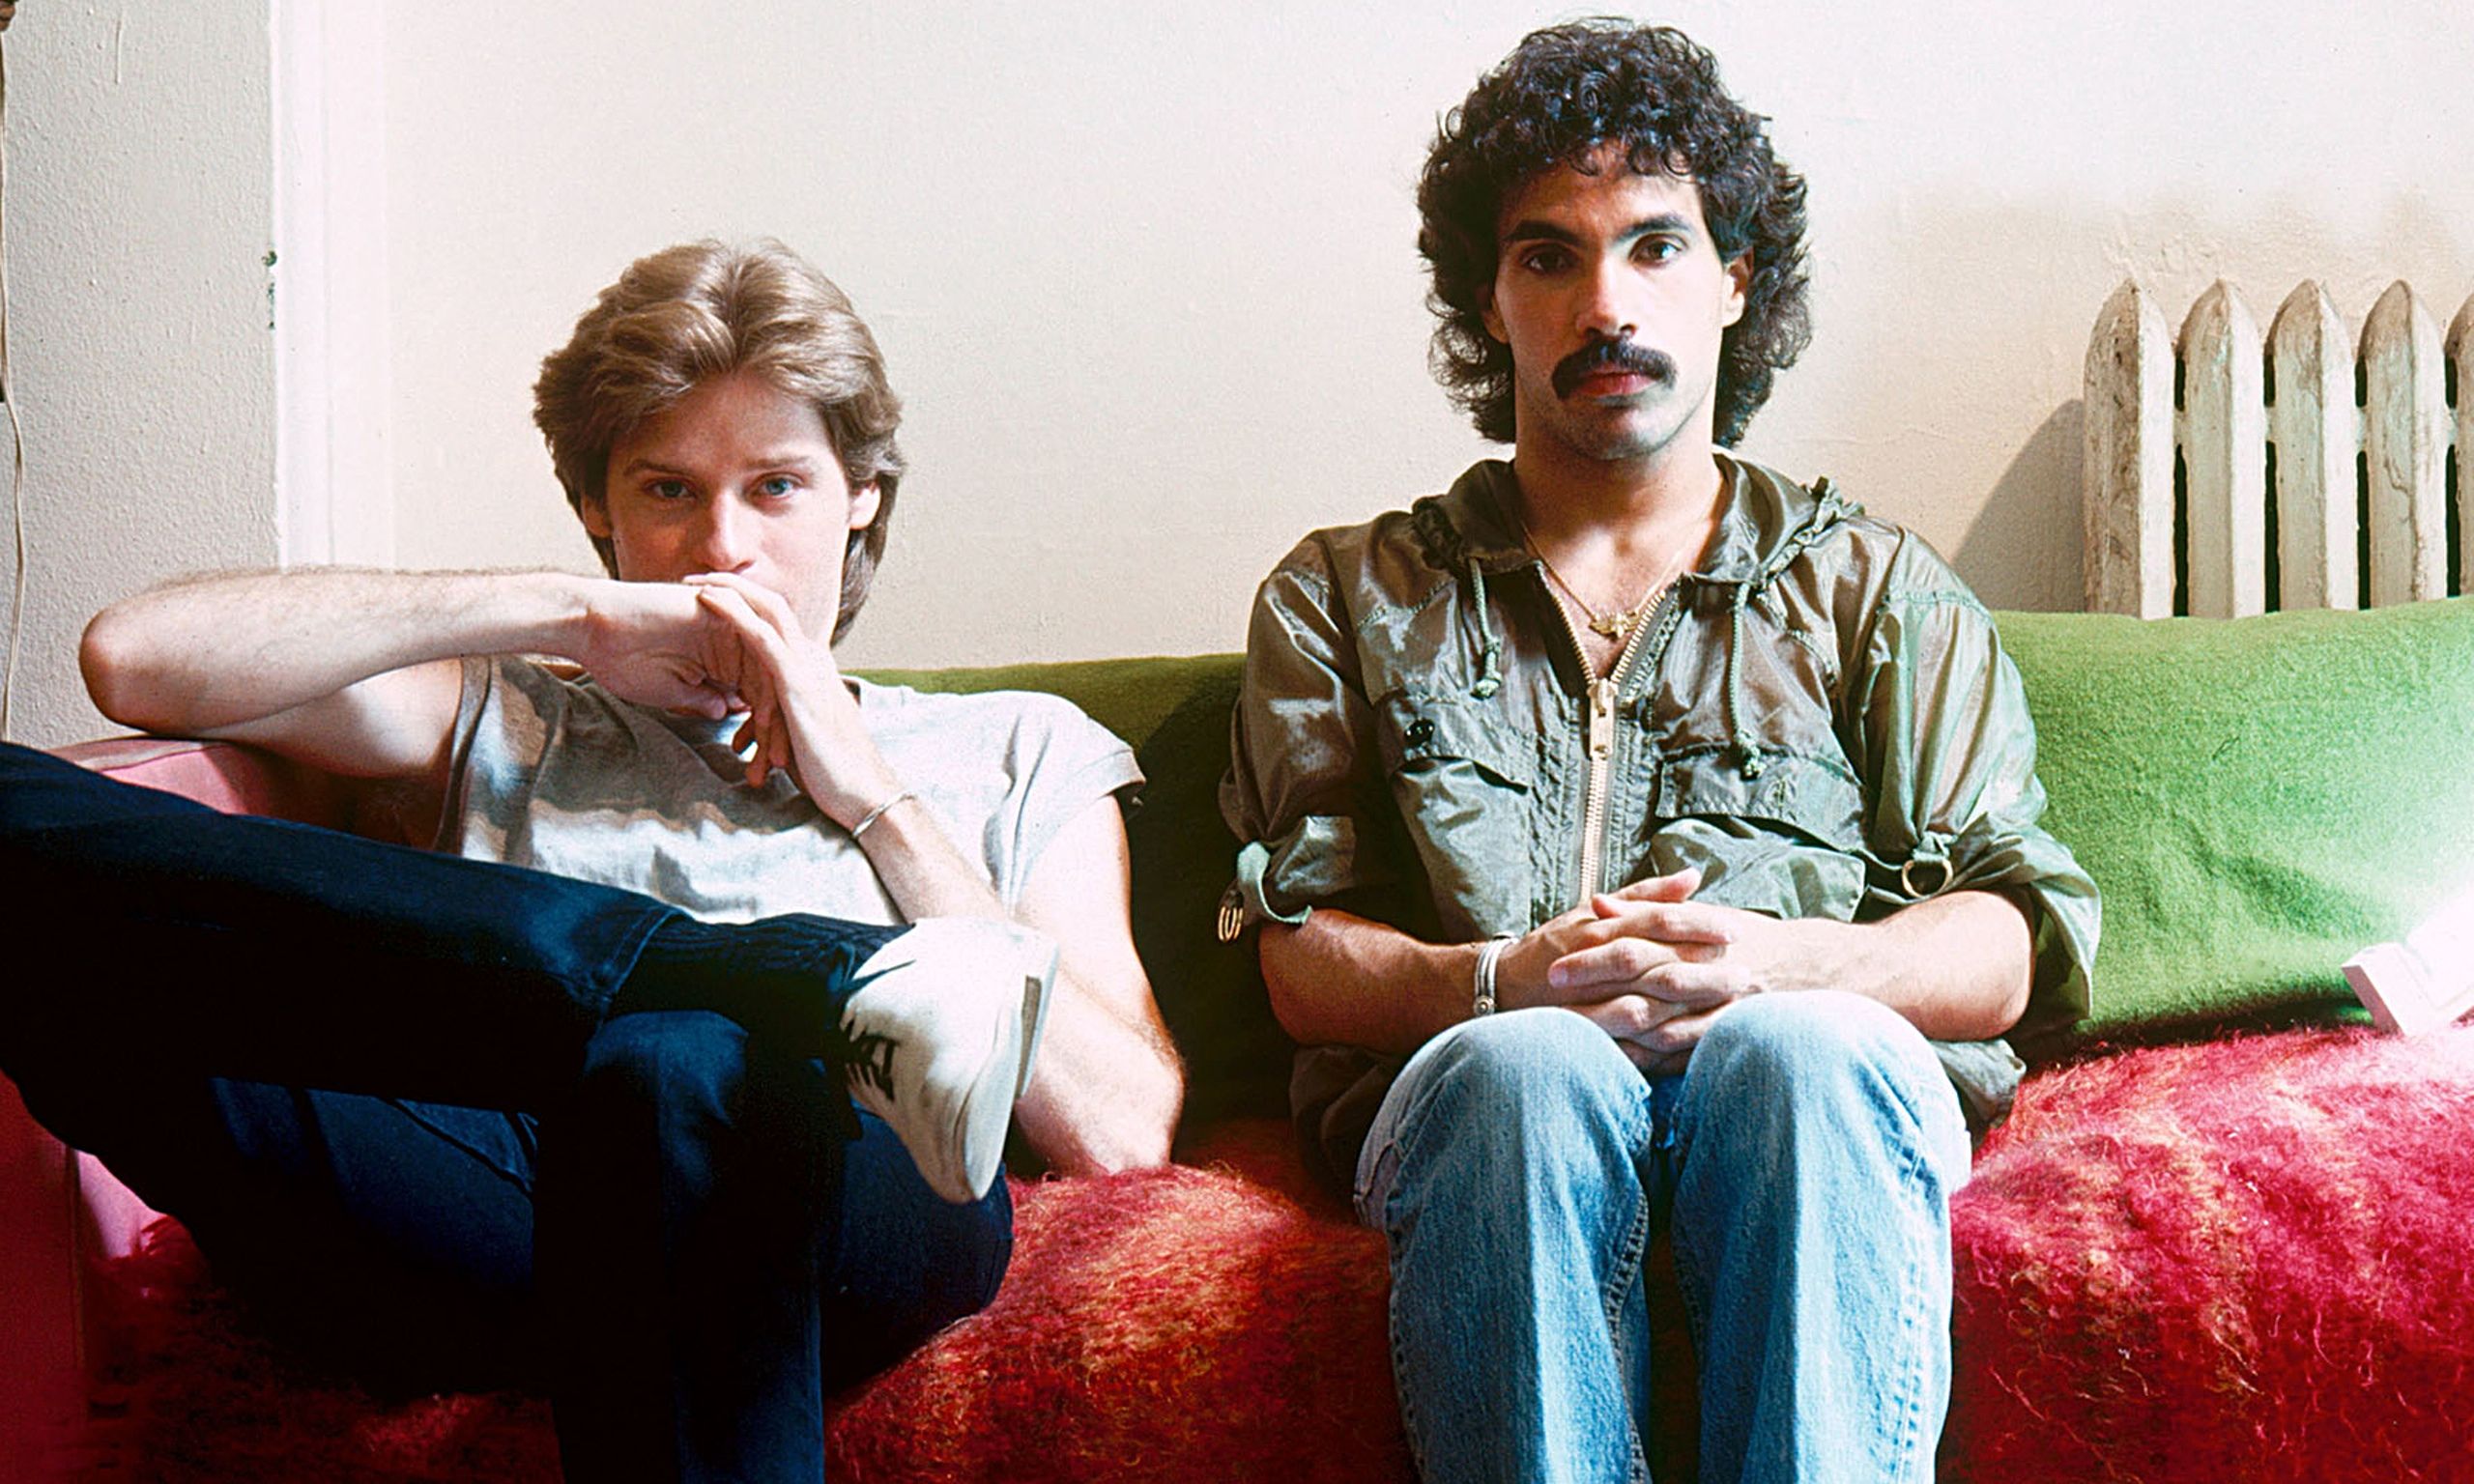 Daryl Hall and John Oates on 50 years of friendship